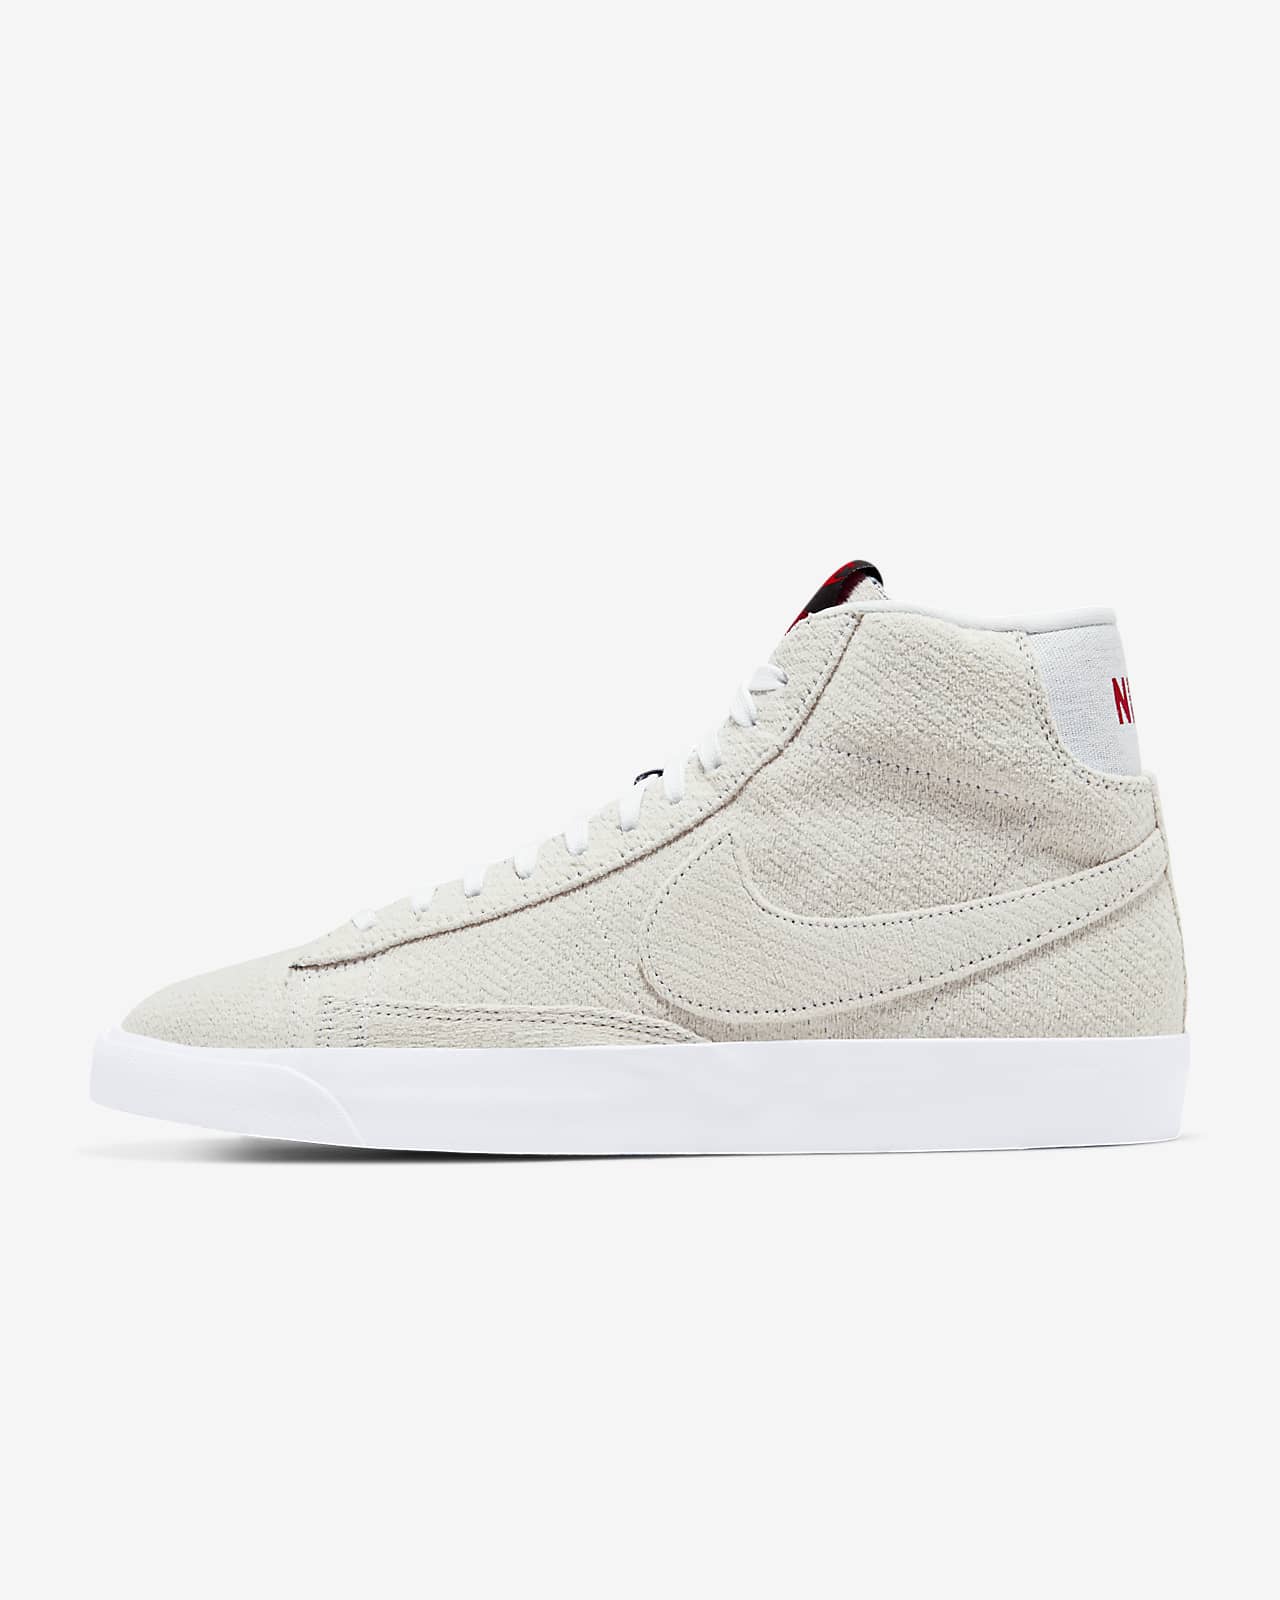 where to buy nike stranger things shoes